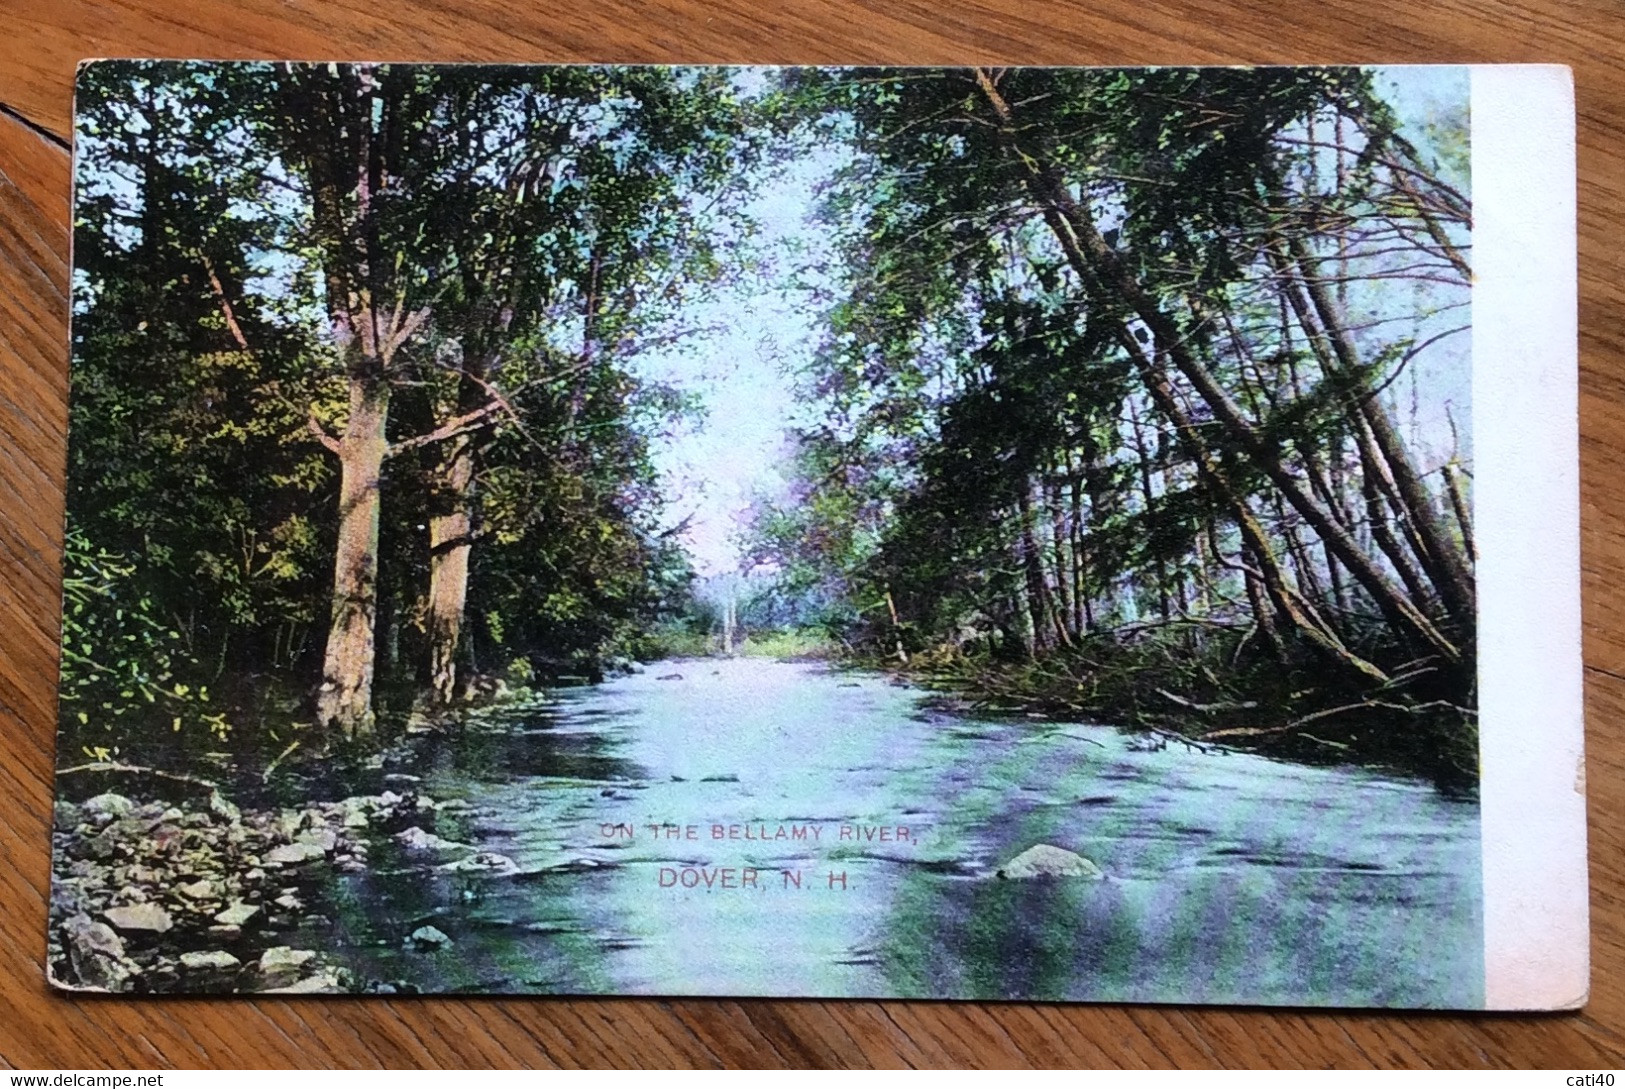 USA - DOVER N.H. ON THE BELLAMY RIVER   - VINTAGE POST CARD 1907 - Cape Cod